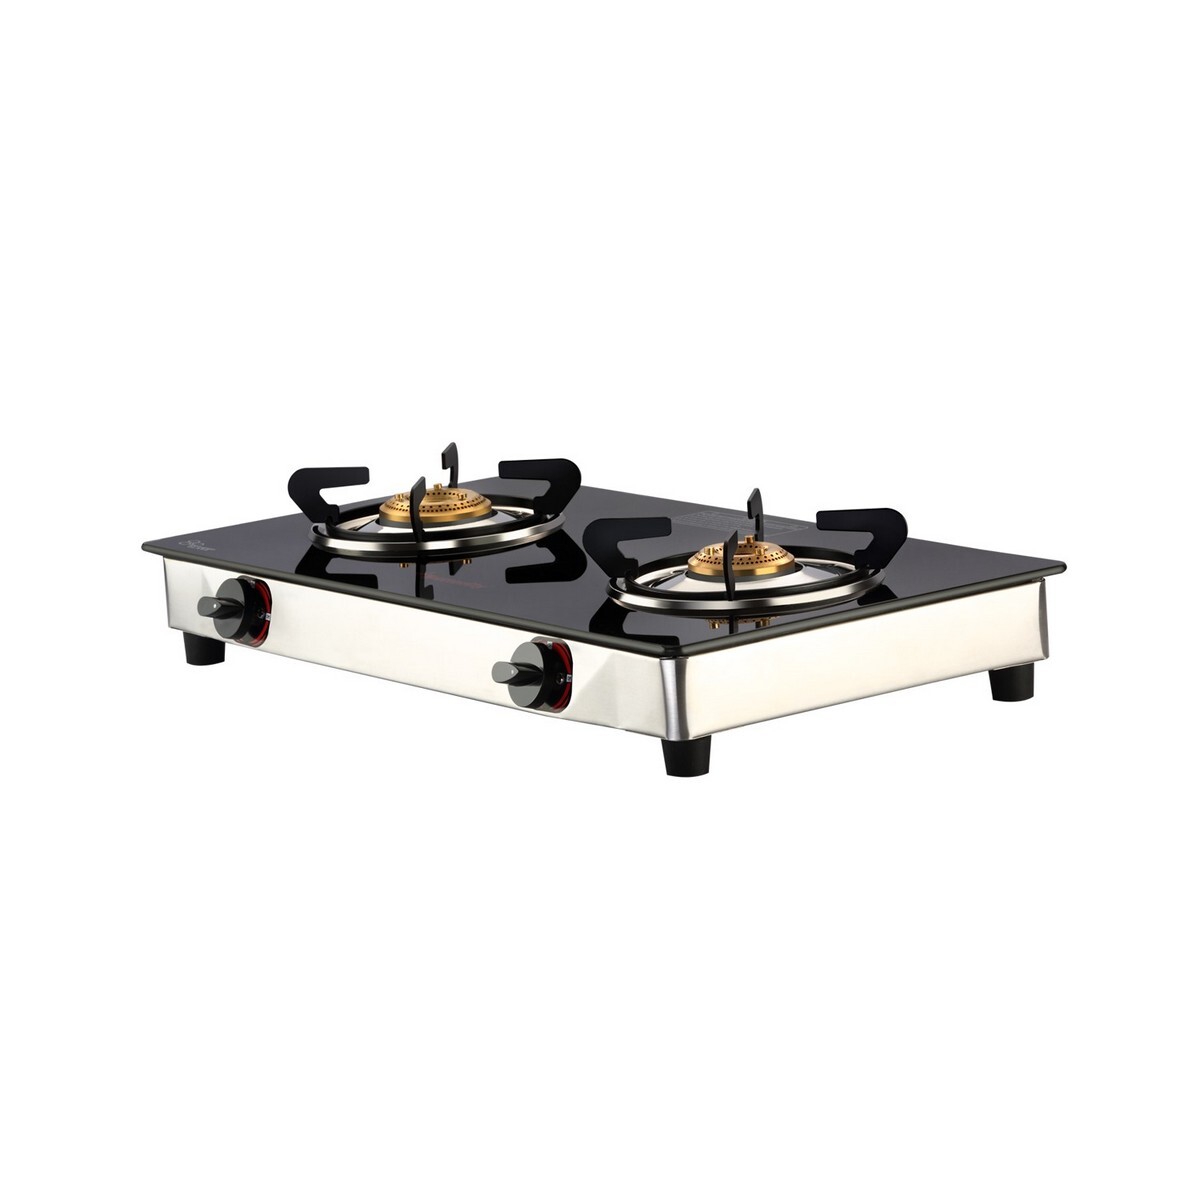 Butterfly Gas Stove Duo Plus 2 Burner